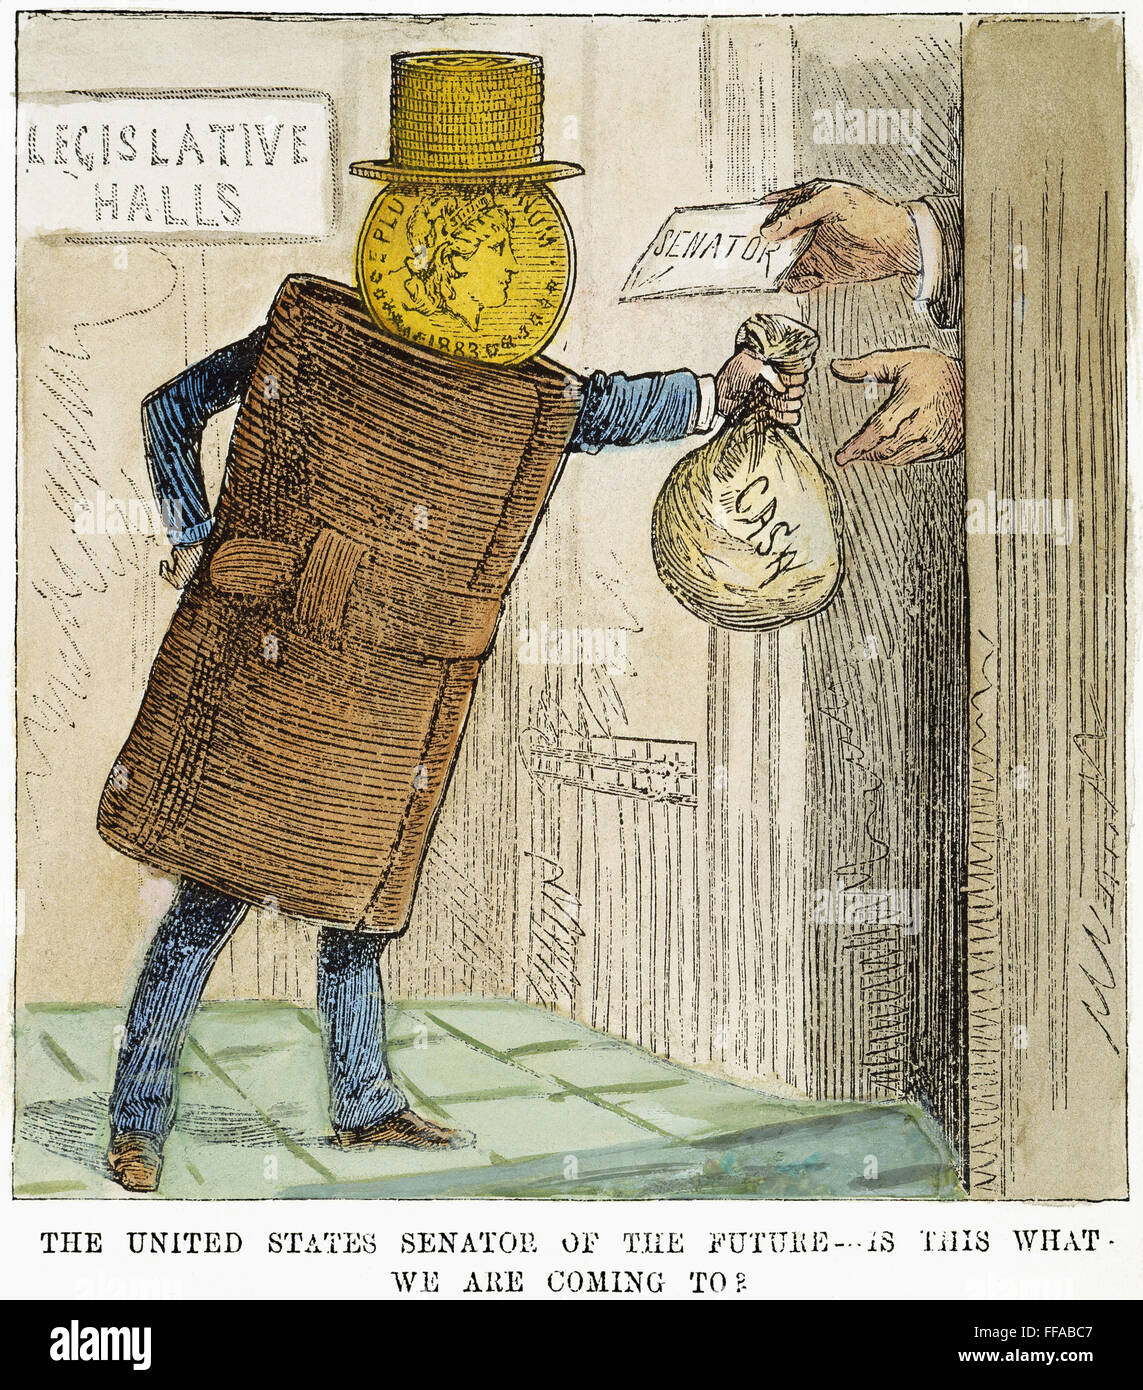 POLITICAL CORRUPTION, 1883./n'The United States senator of the future - is this what we are coming to?' American cartoon commenting on the power of the all-mighty dollar over members of the Senate. Stock Photo